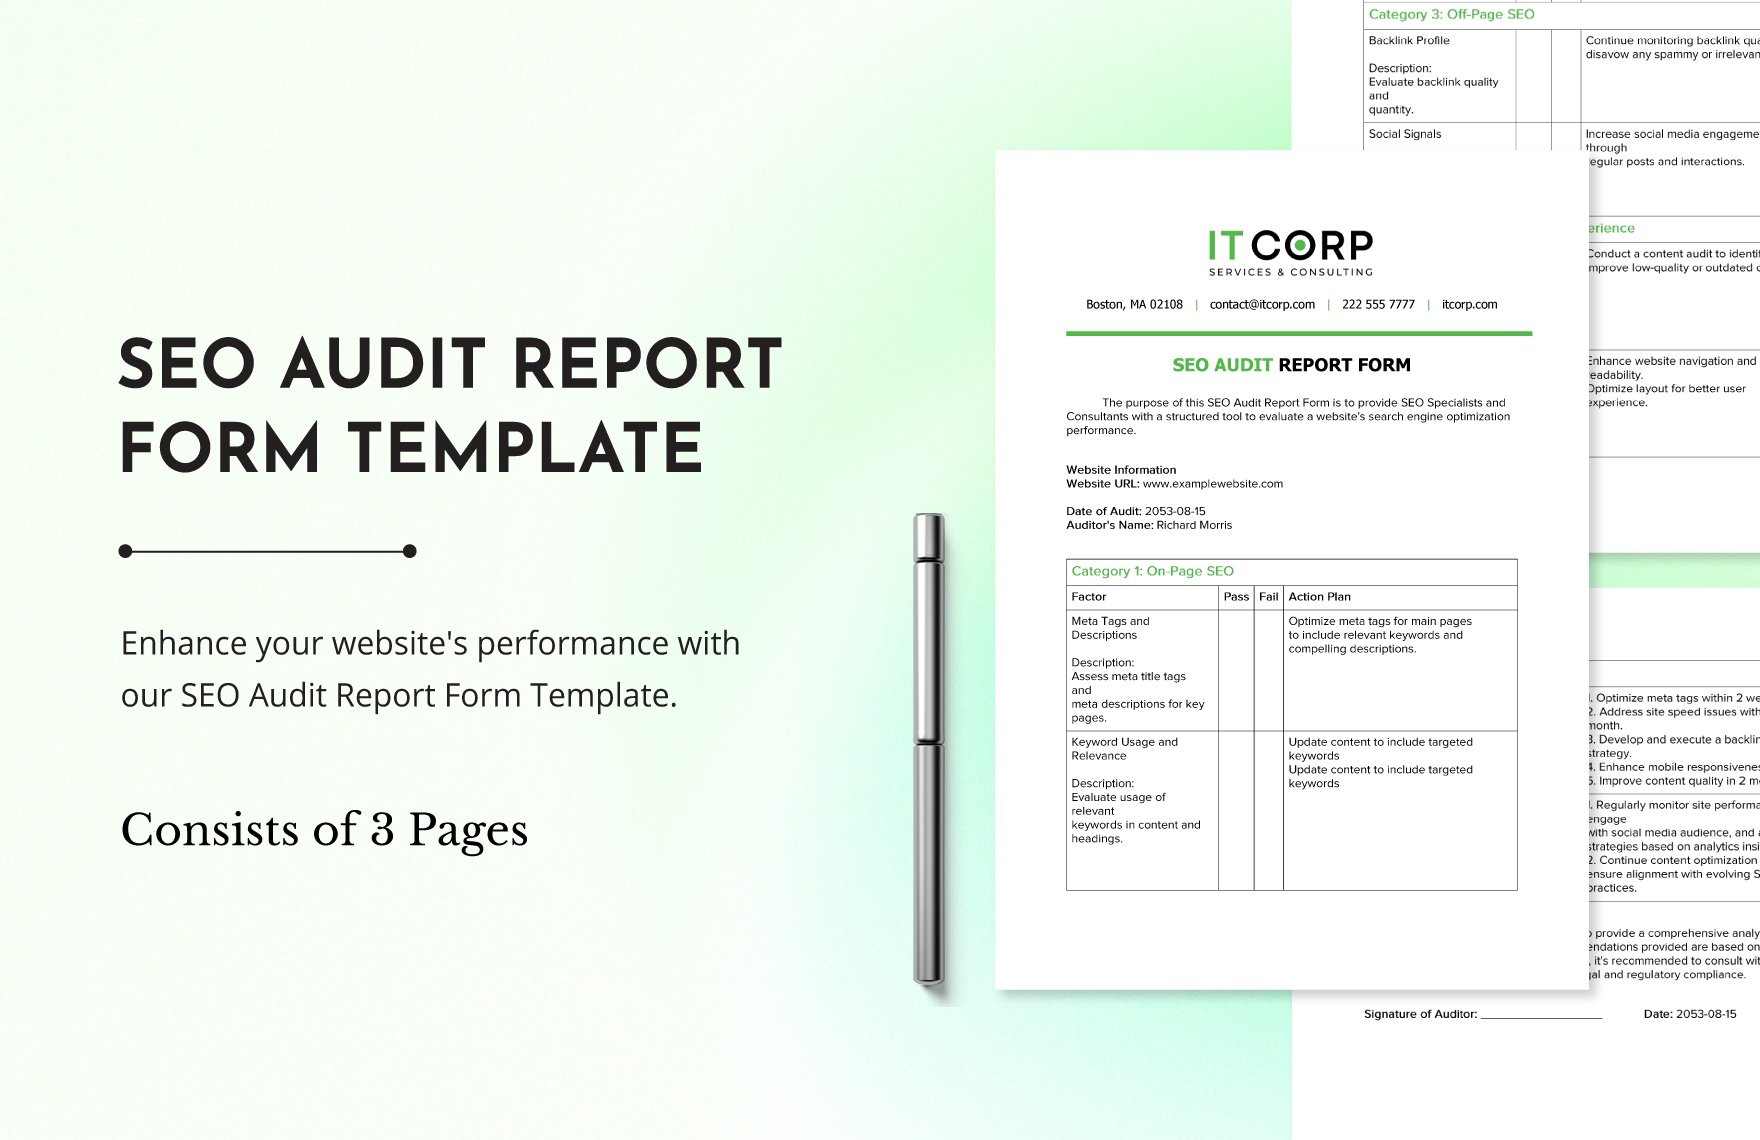 SEO Audit Report Form Template